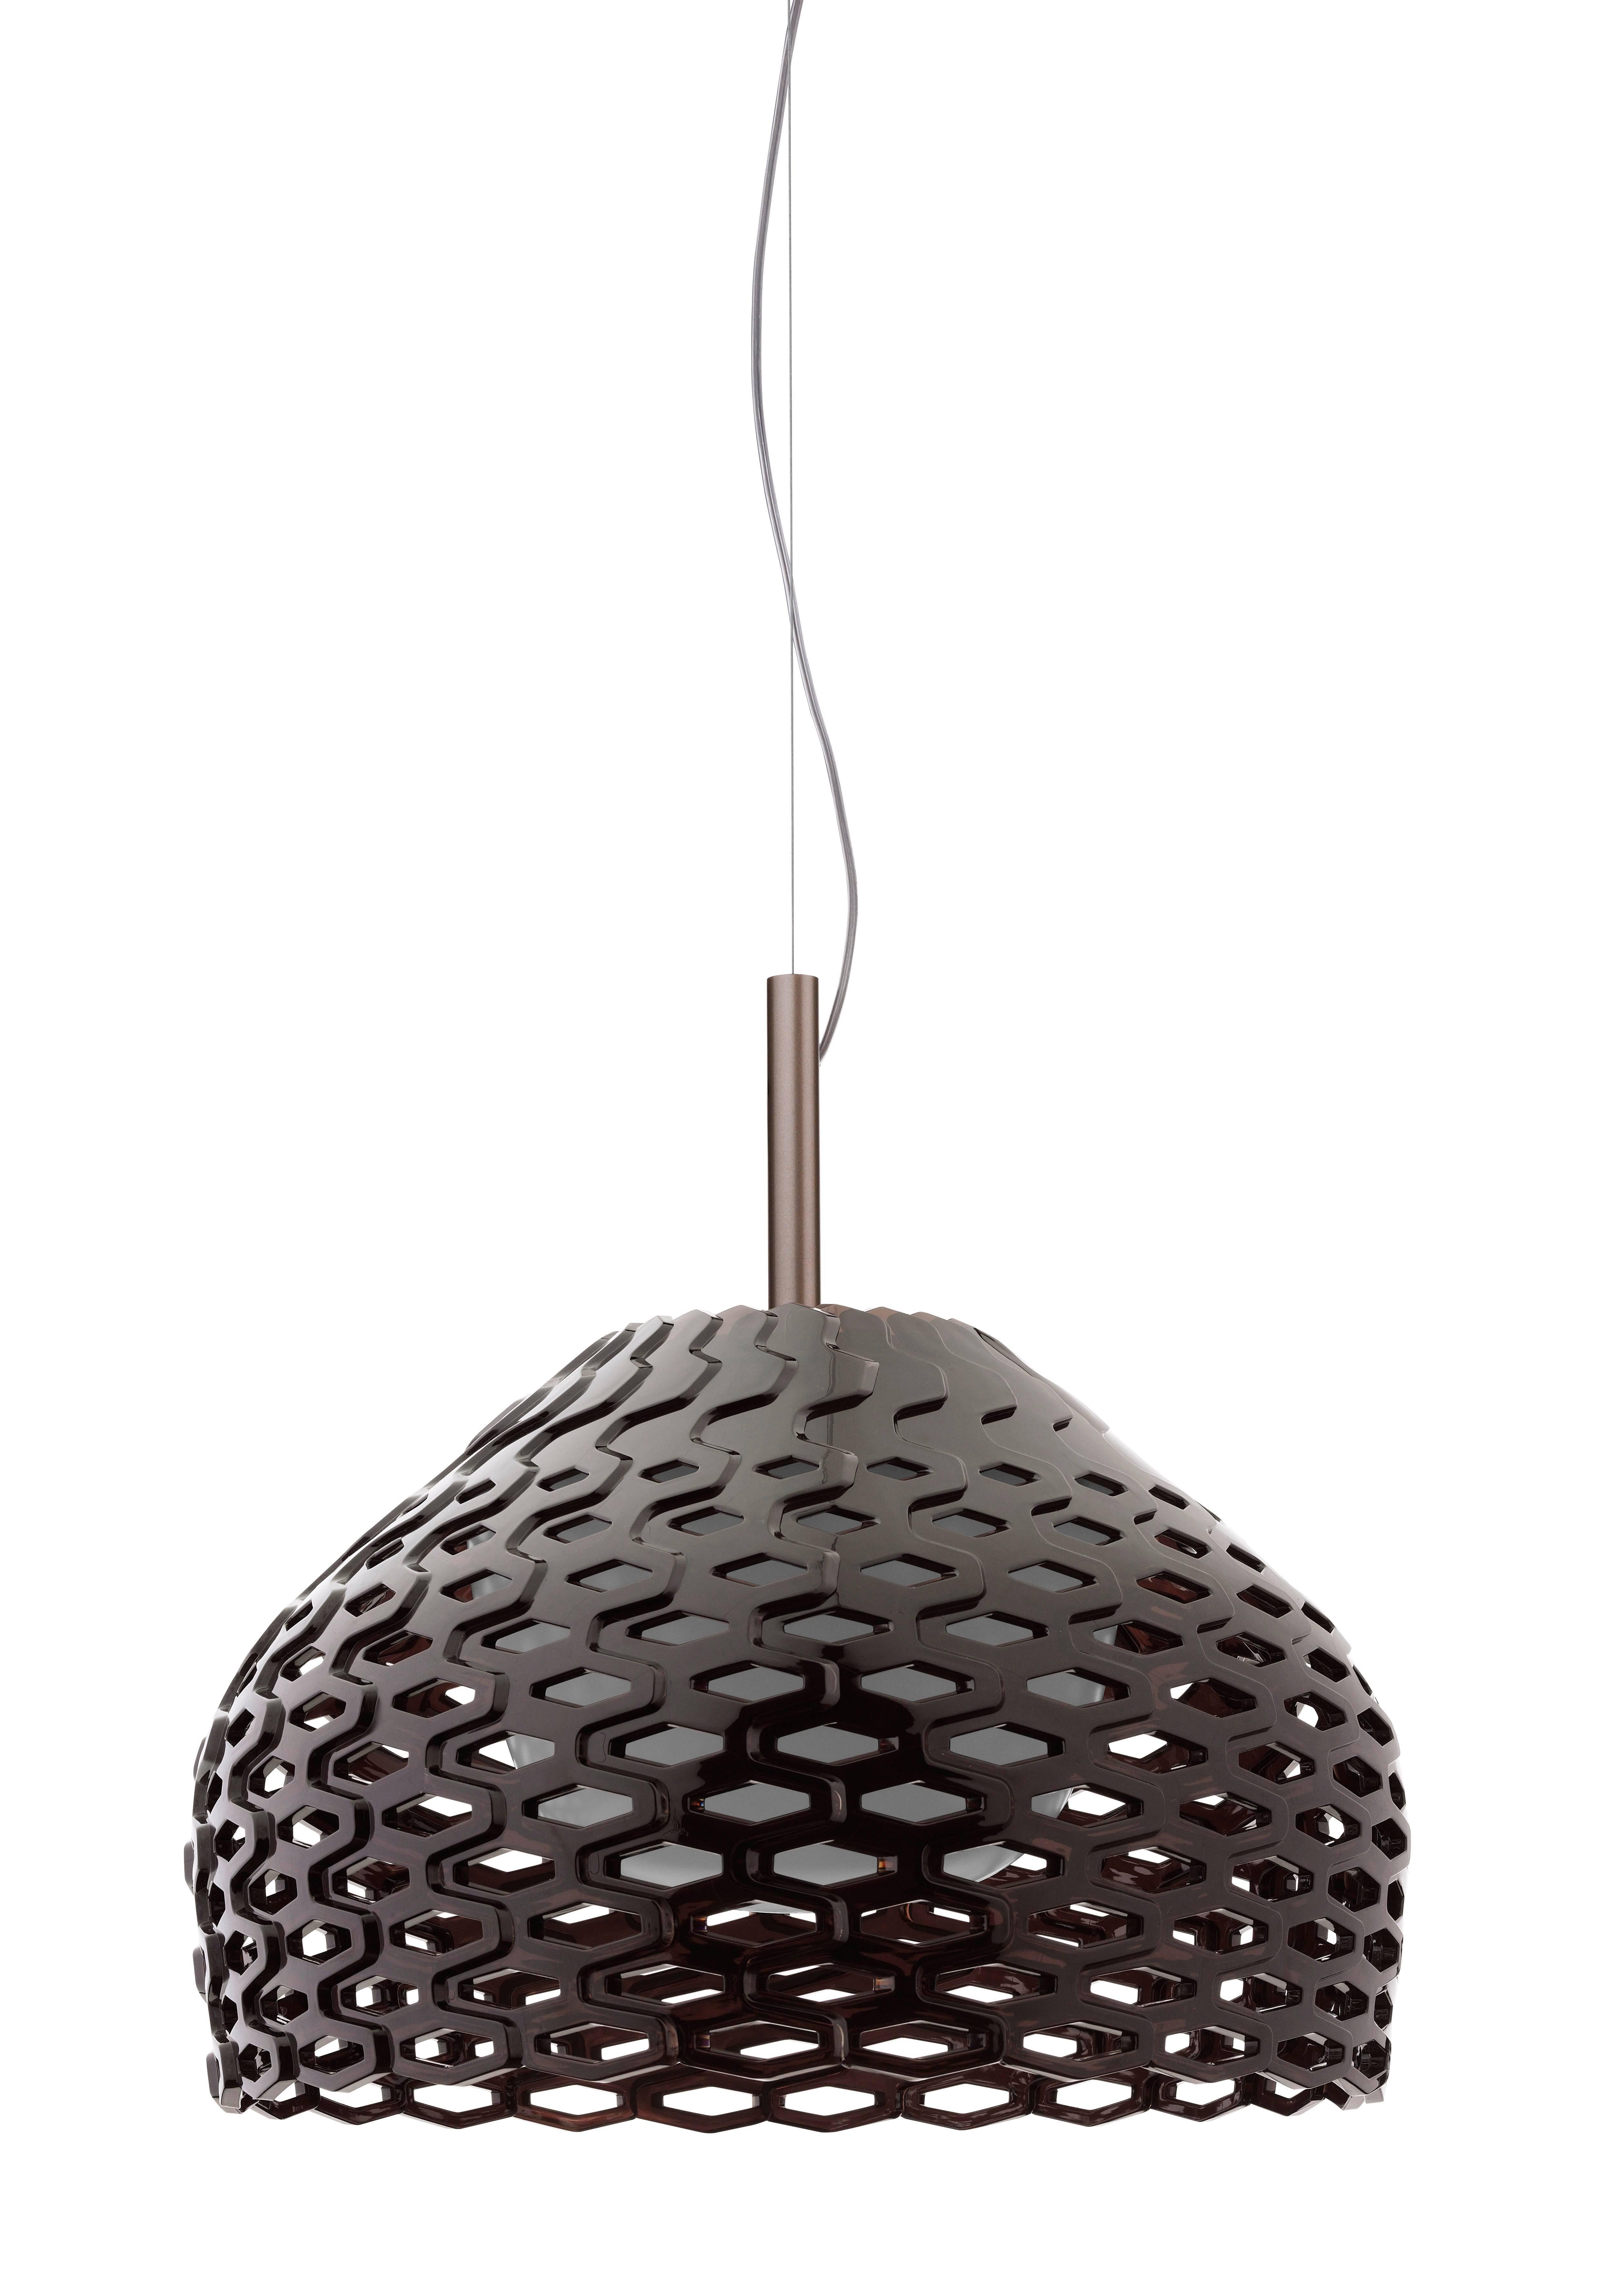 Its name is French for “armadillo,” the unassuming animal whose brilliant structure keeps it protected and makes it unique. Designer Patricia Urquiola conceptualized this table lamp to play on the filtration of light, with remarkable results.

The